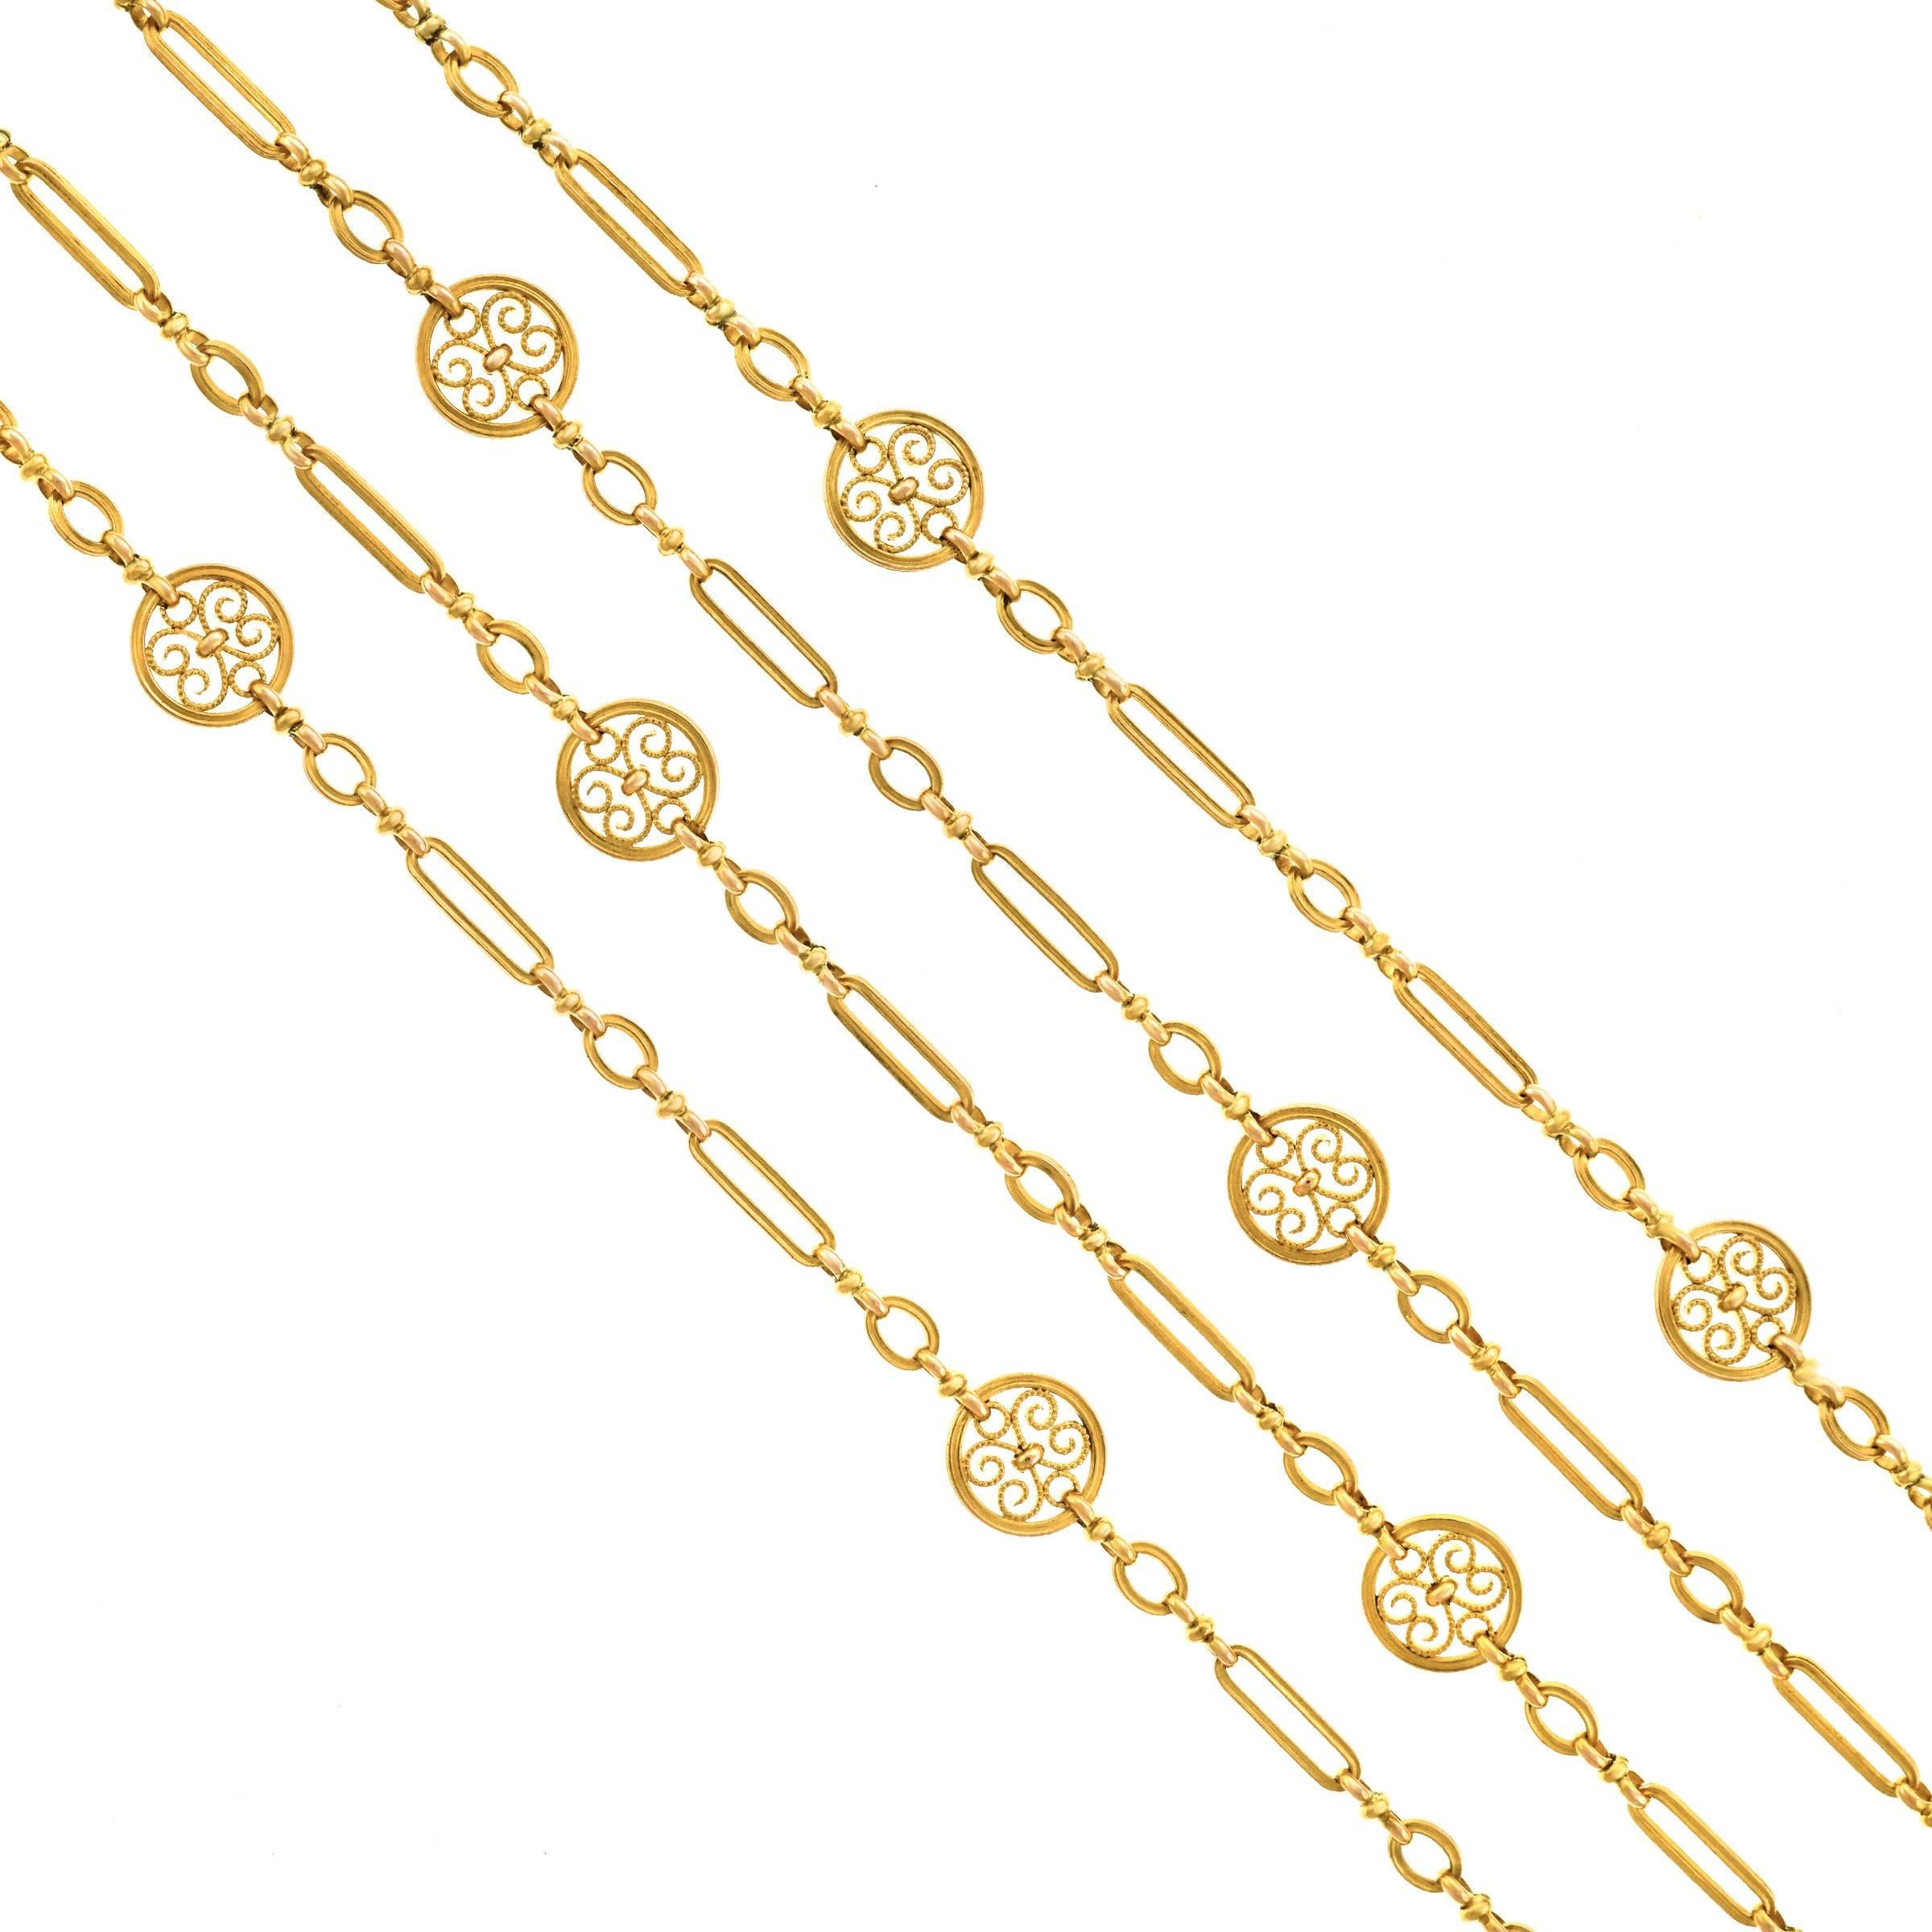 Women's or Men's Antique French 44-Inch Gold Filigree Necklace